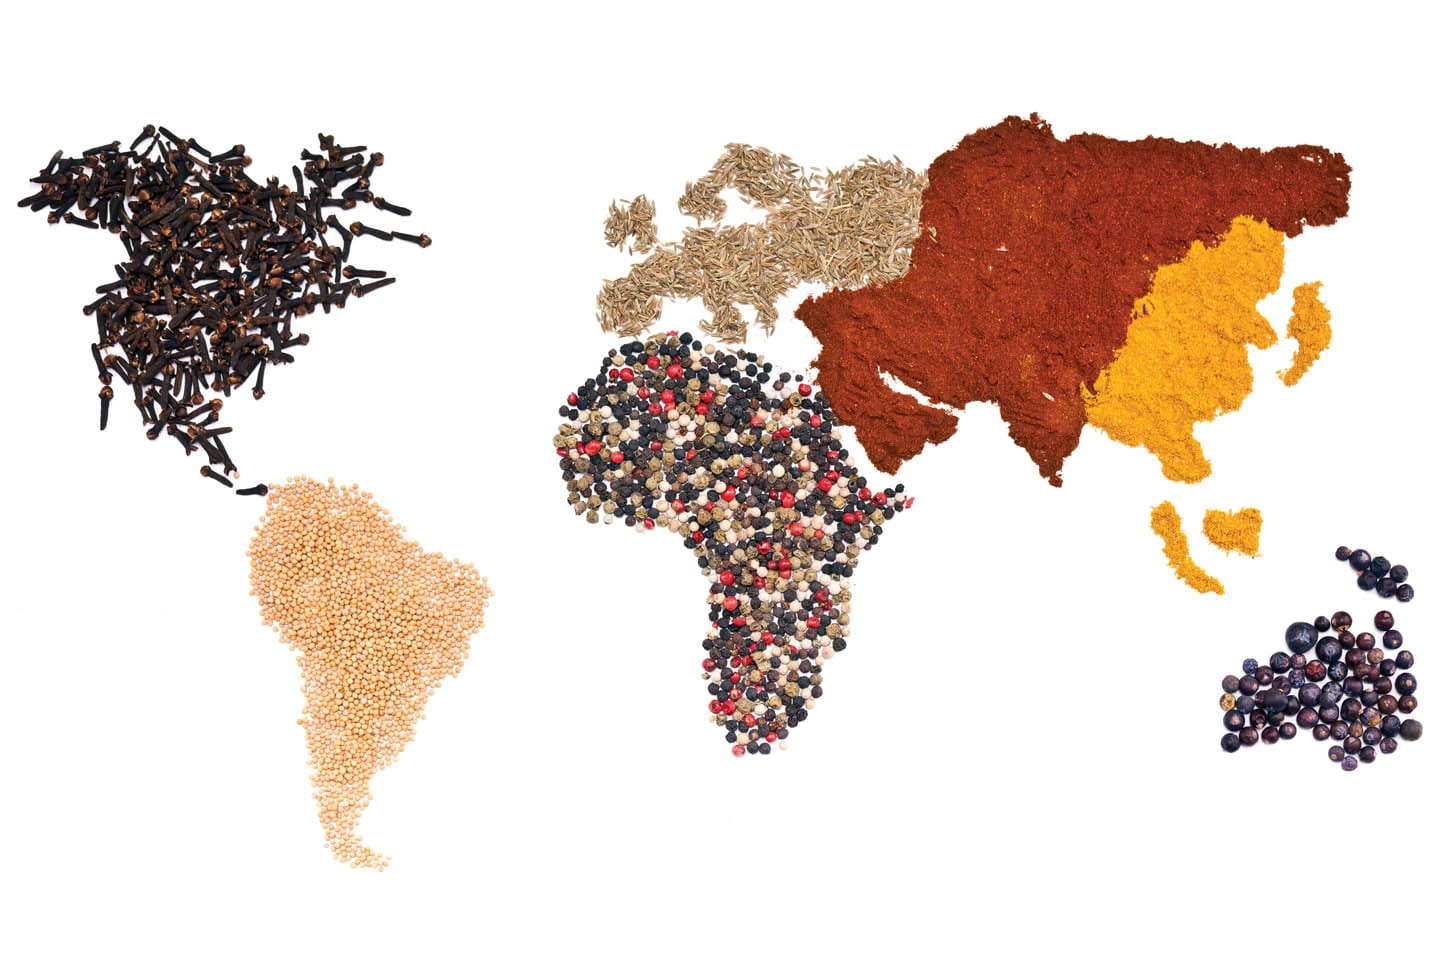 World map made with nuts, grains, berries, seeds, and spices